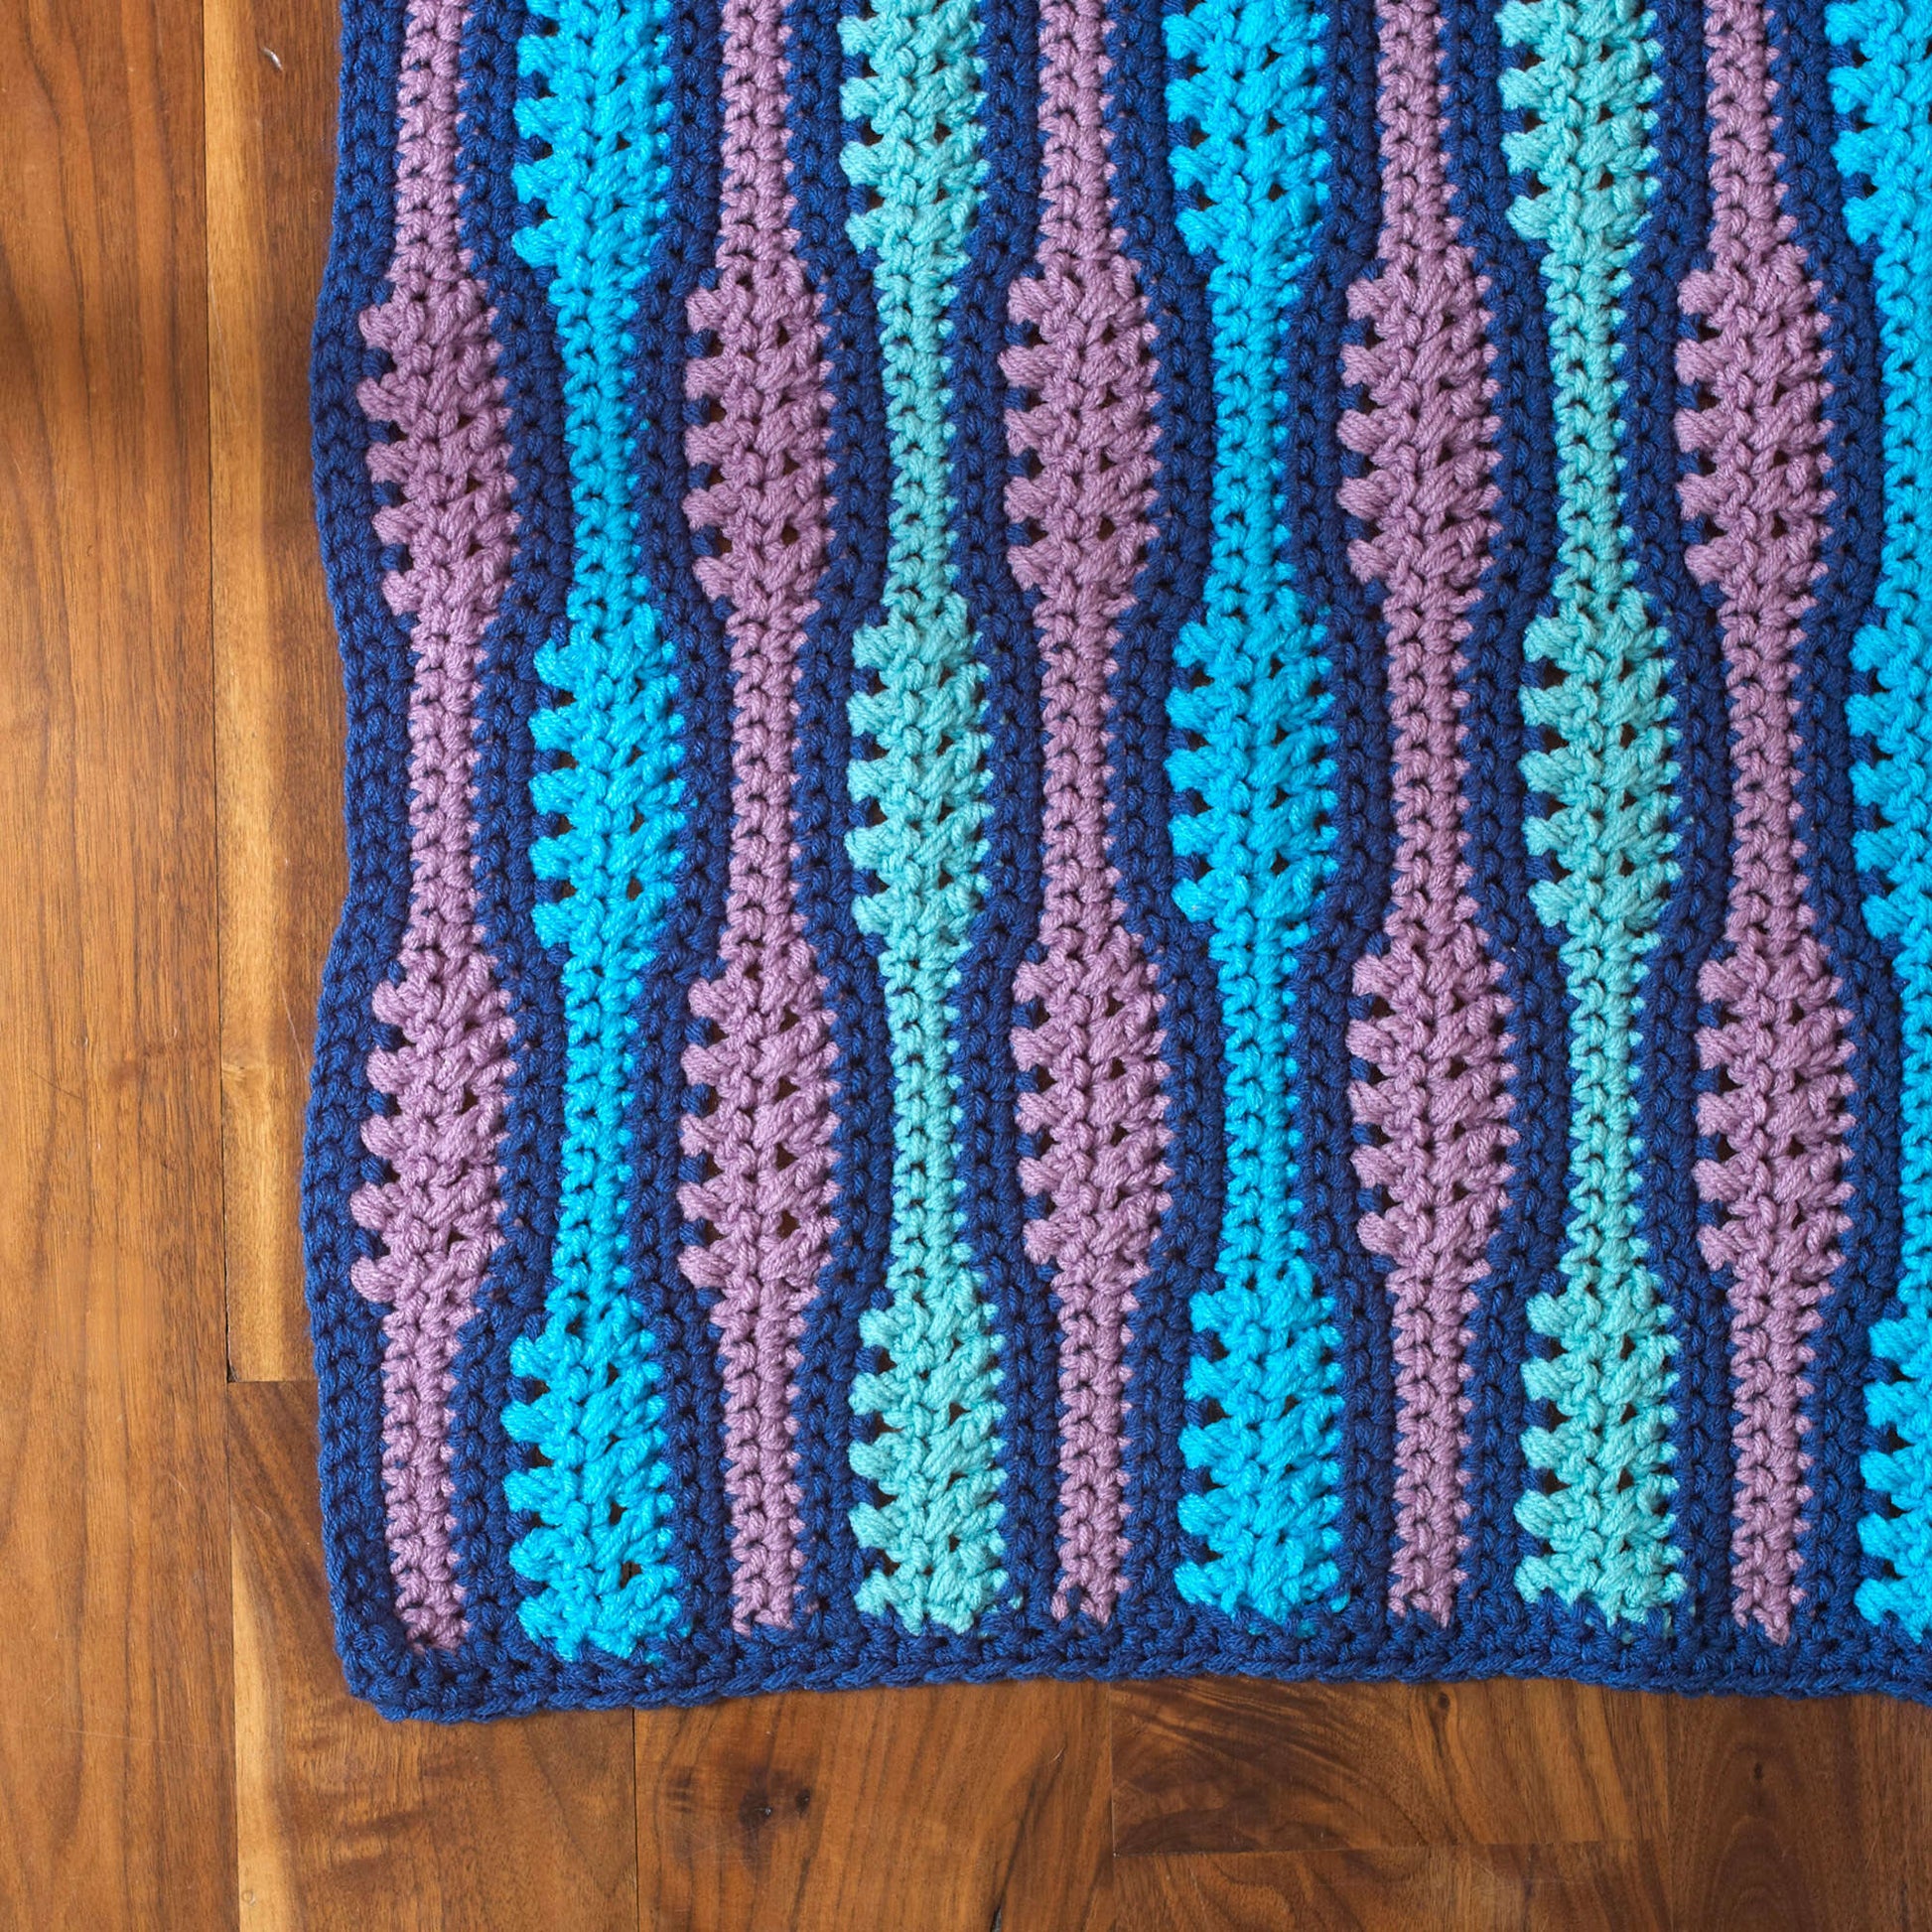 Free Red Heart Crochet Textured Waves Rug Pattern